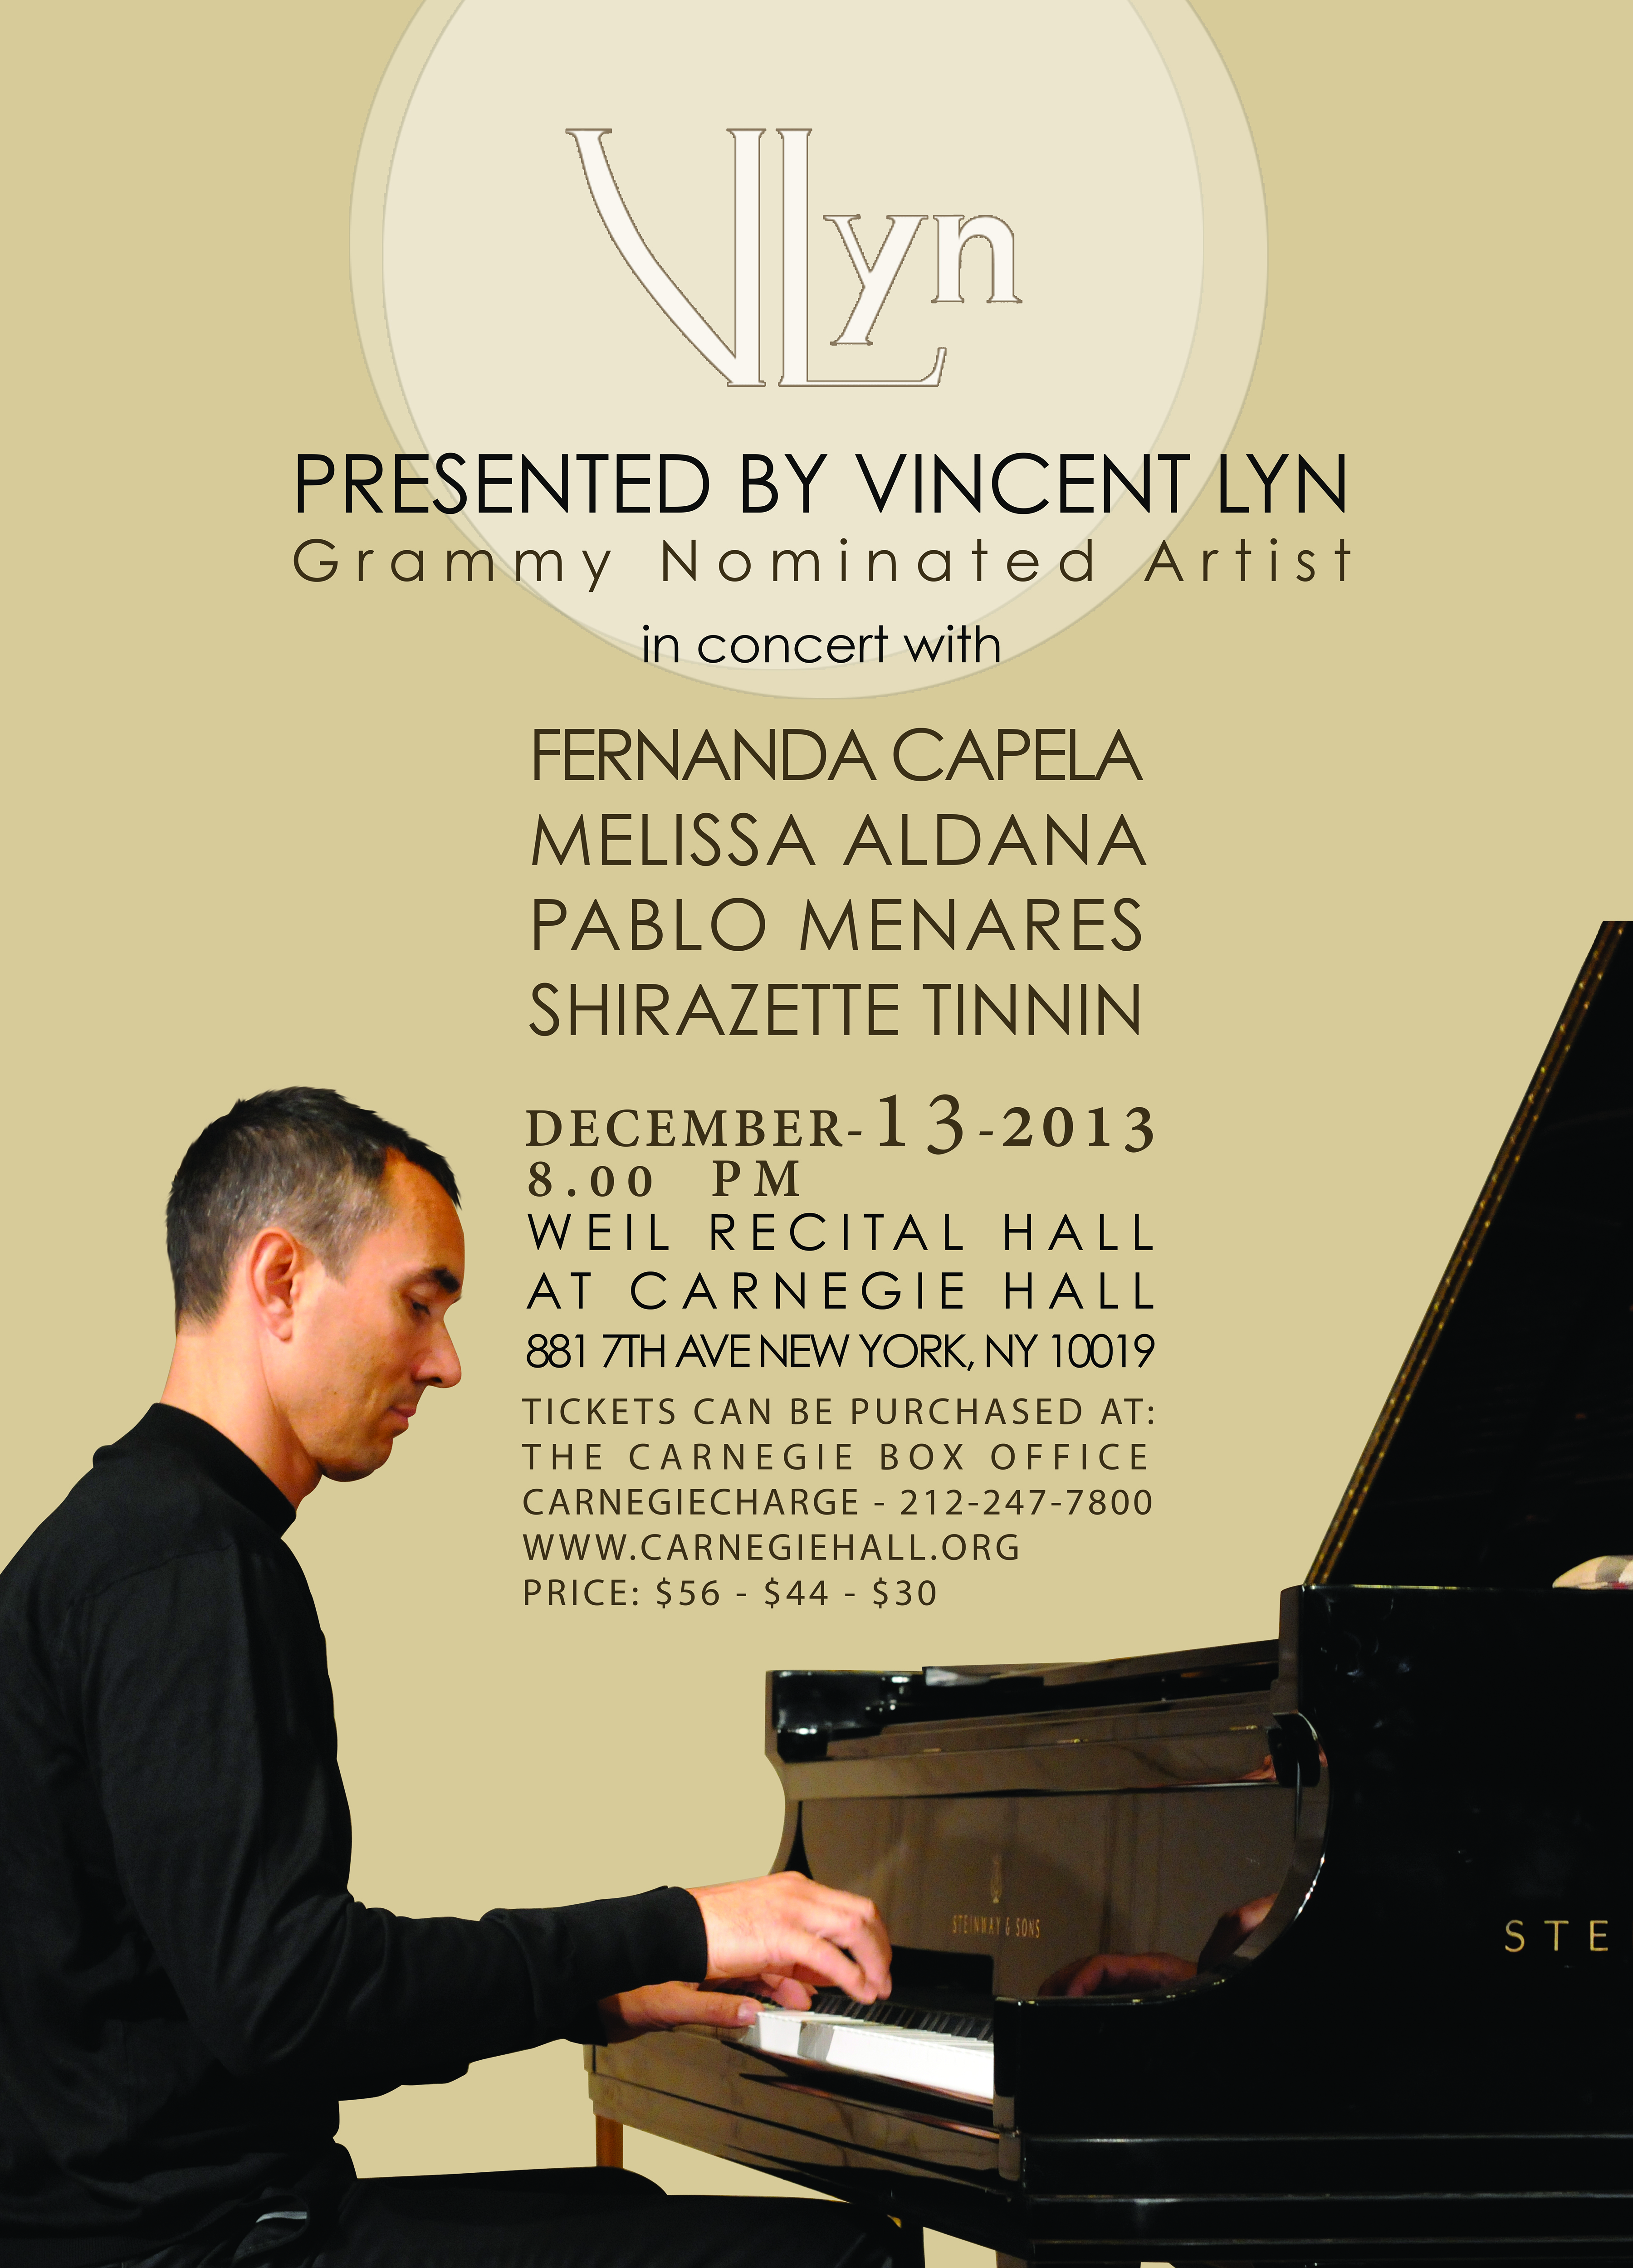 Vincent Lyn 2nd Carnegie Hall Concert. December 13th, 2013. Once again sold out performance